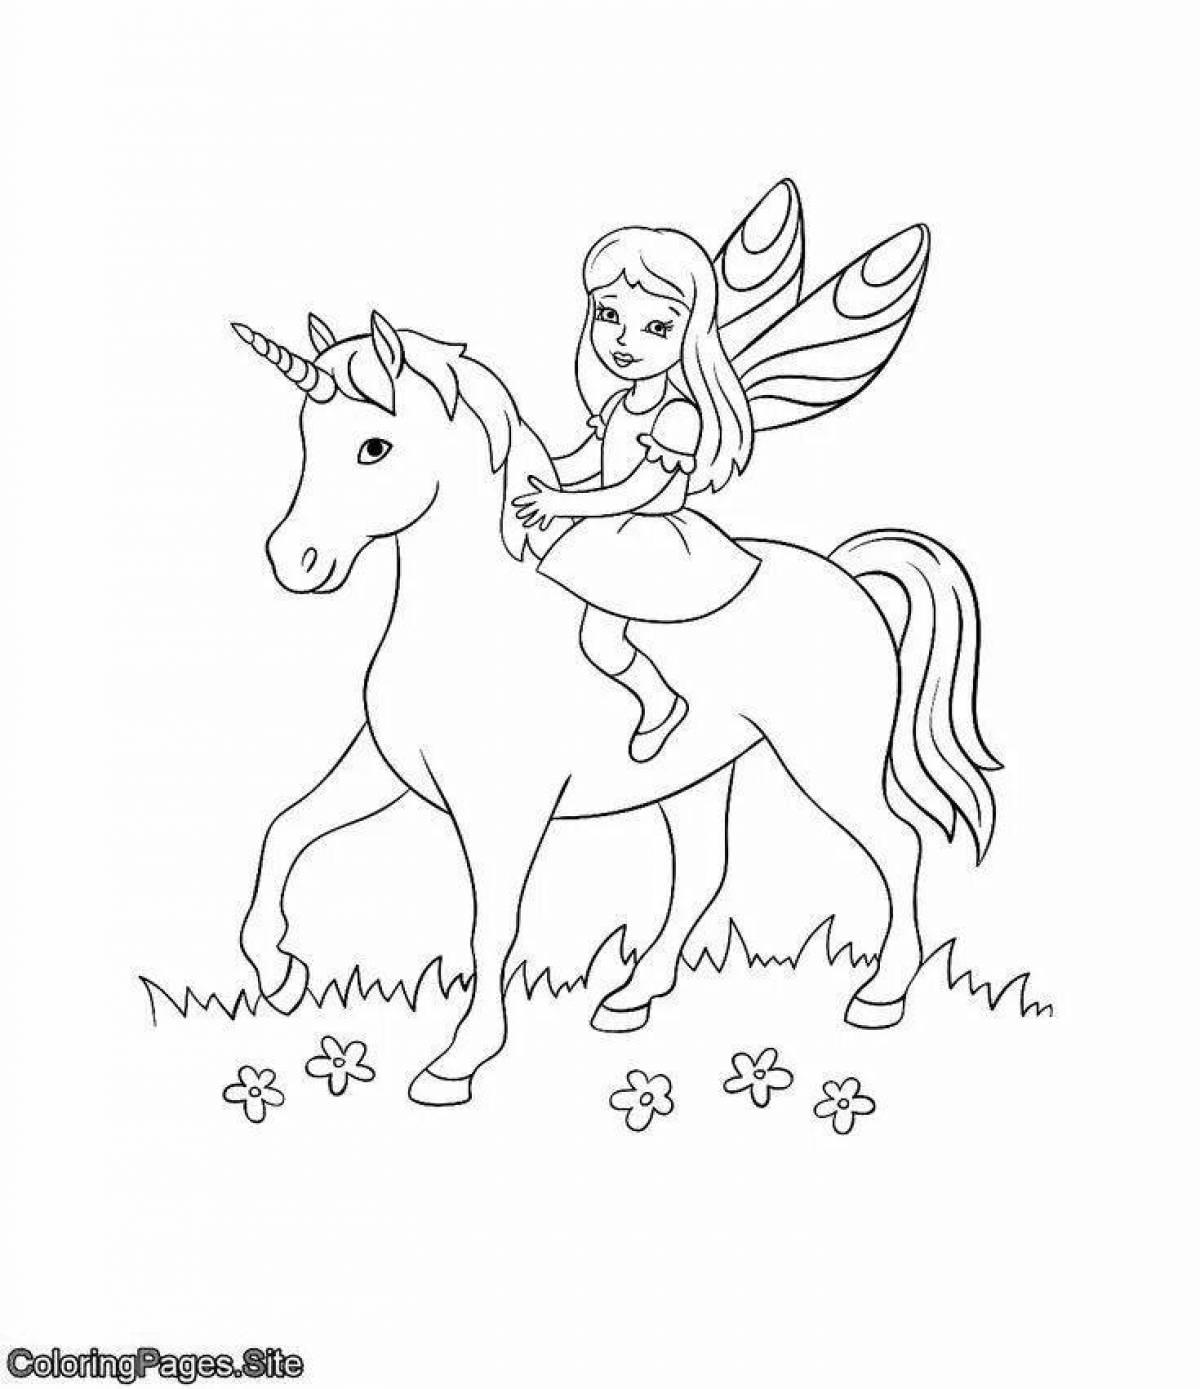 Princess with unicorn playful coloring page